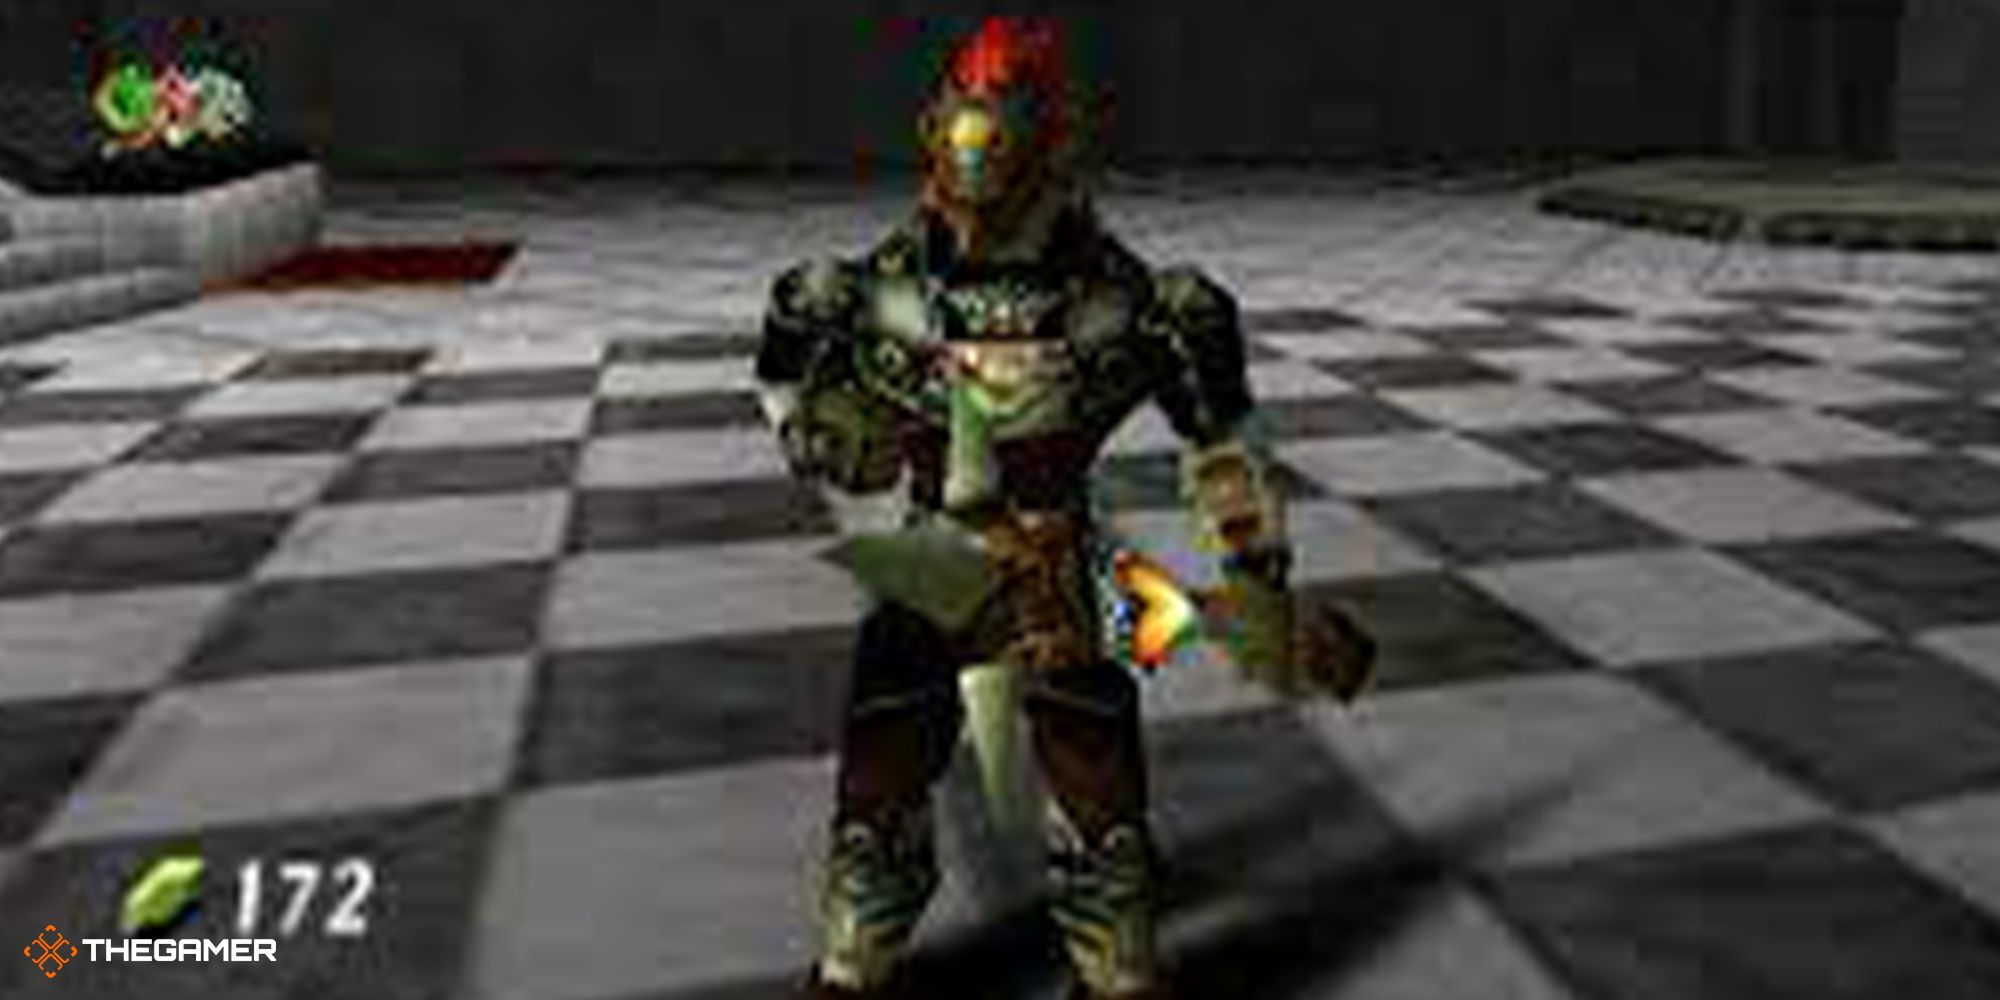 Playing as Ganondorf in Ocarina of Time